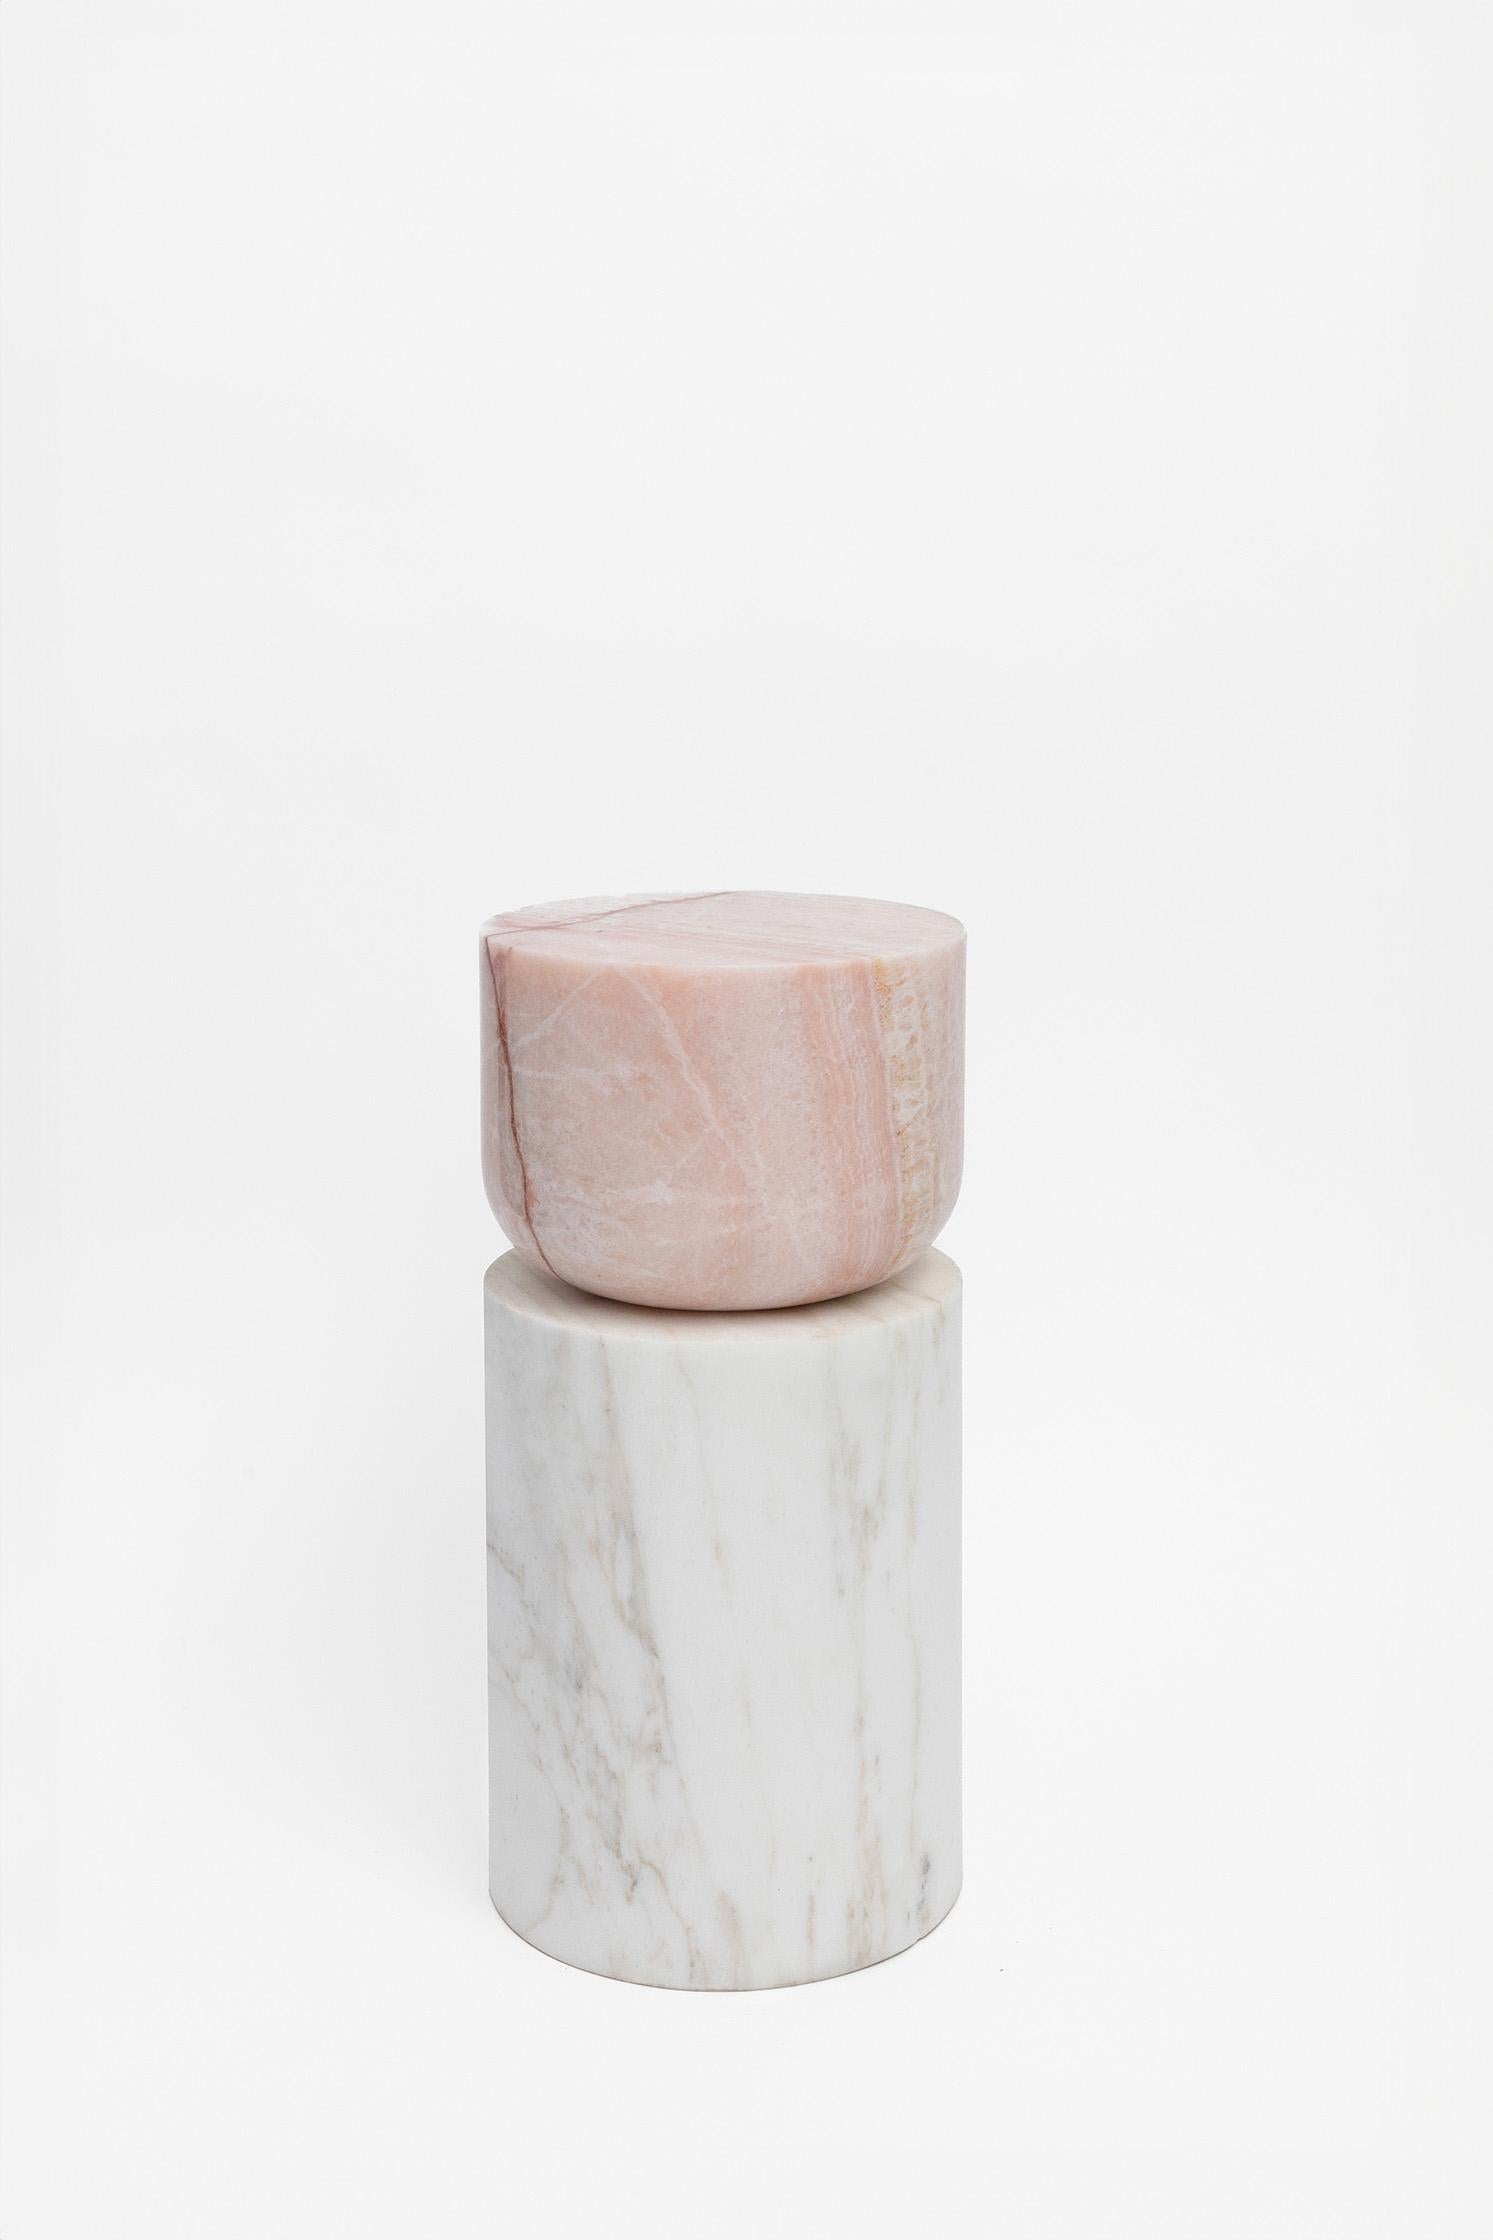 Volcanic Shade of Marble V by Sten Studio

Golden calacatta marble, pink onyx.

9.8 x 9.8 x 19.8 in

The geological meeting between materials produces forms whose geometry is infinitely variable: if we think of the patterns found upon the layers of